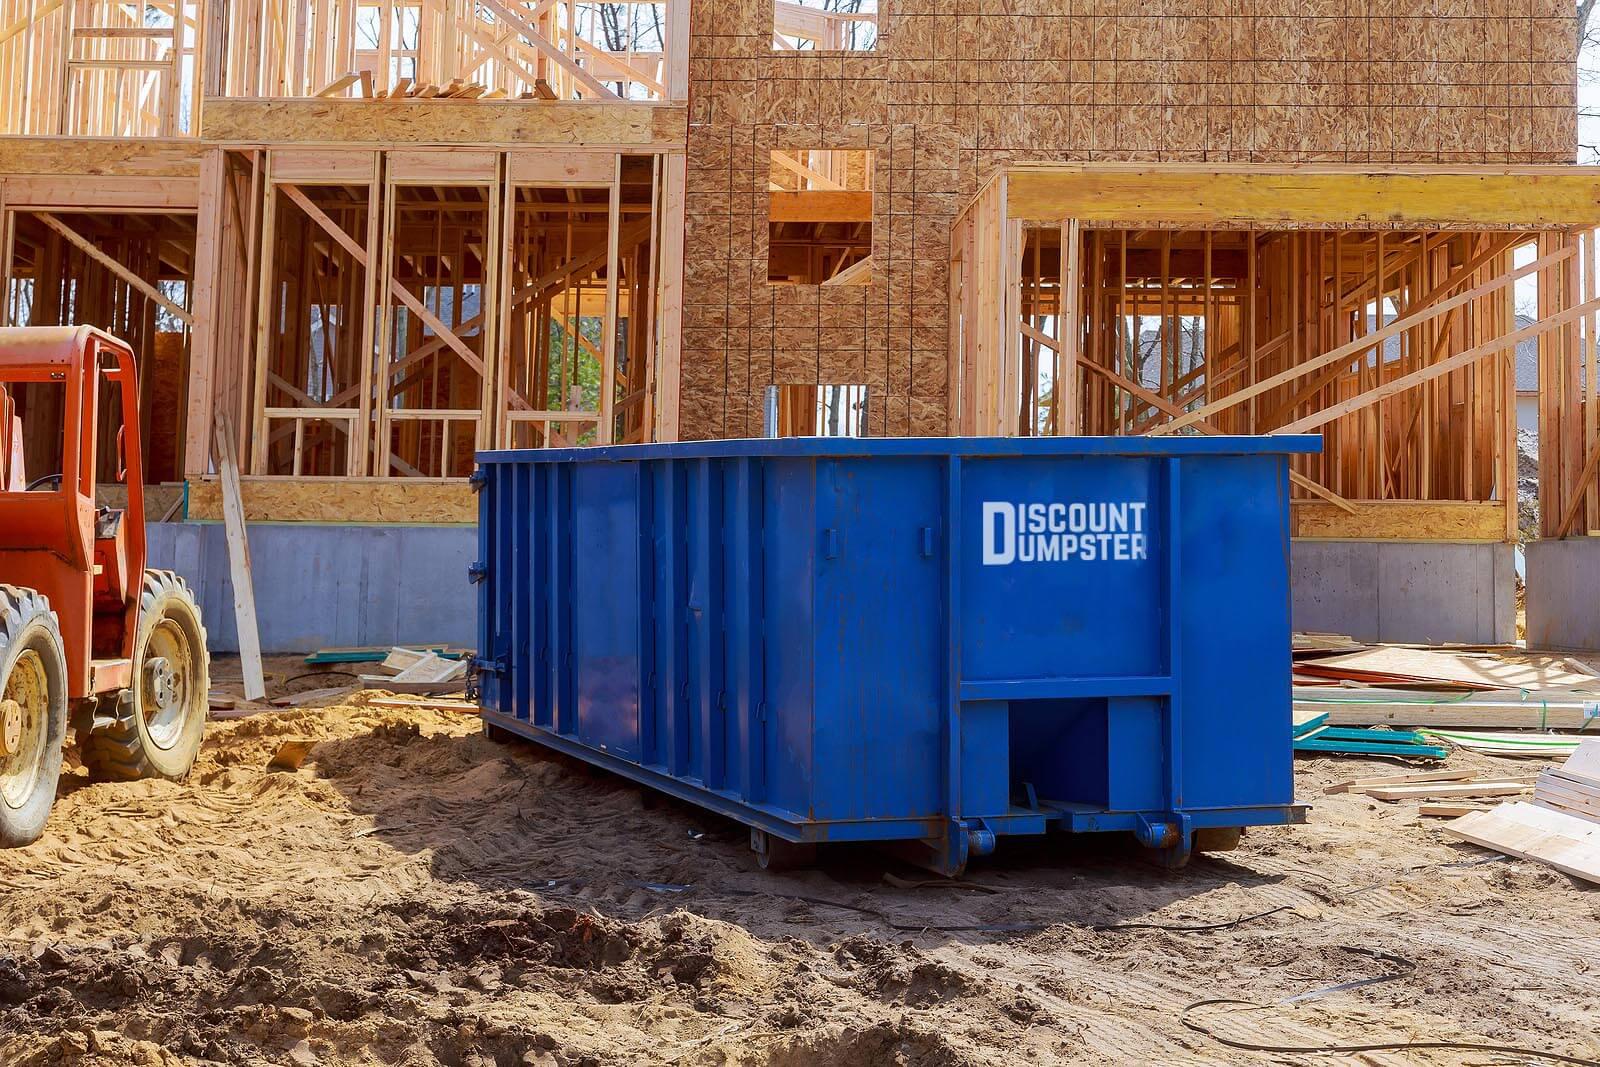 Discount dumpster has residential roll off dumpsters for home construction in Denver co